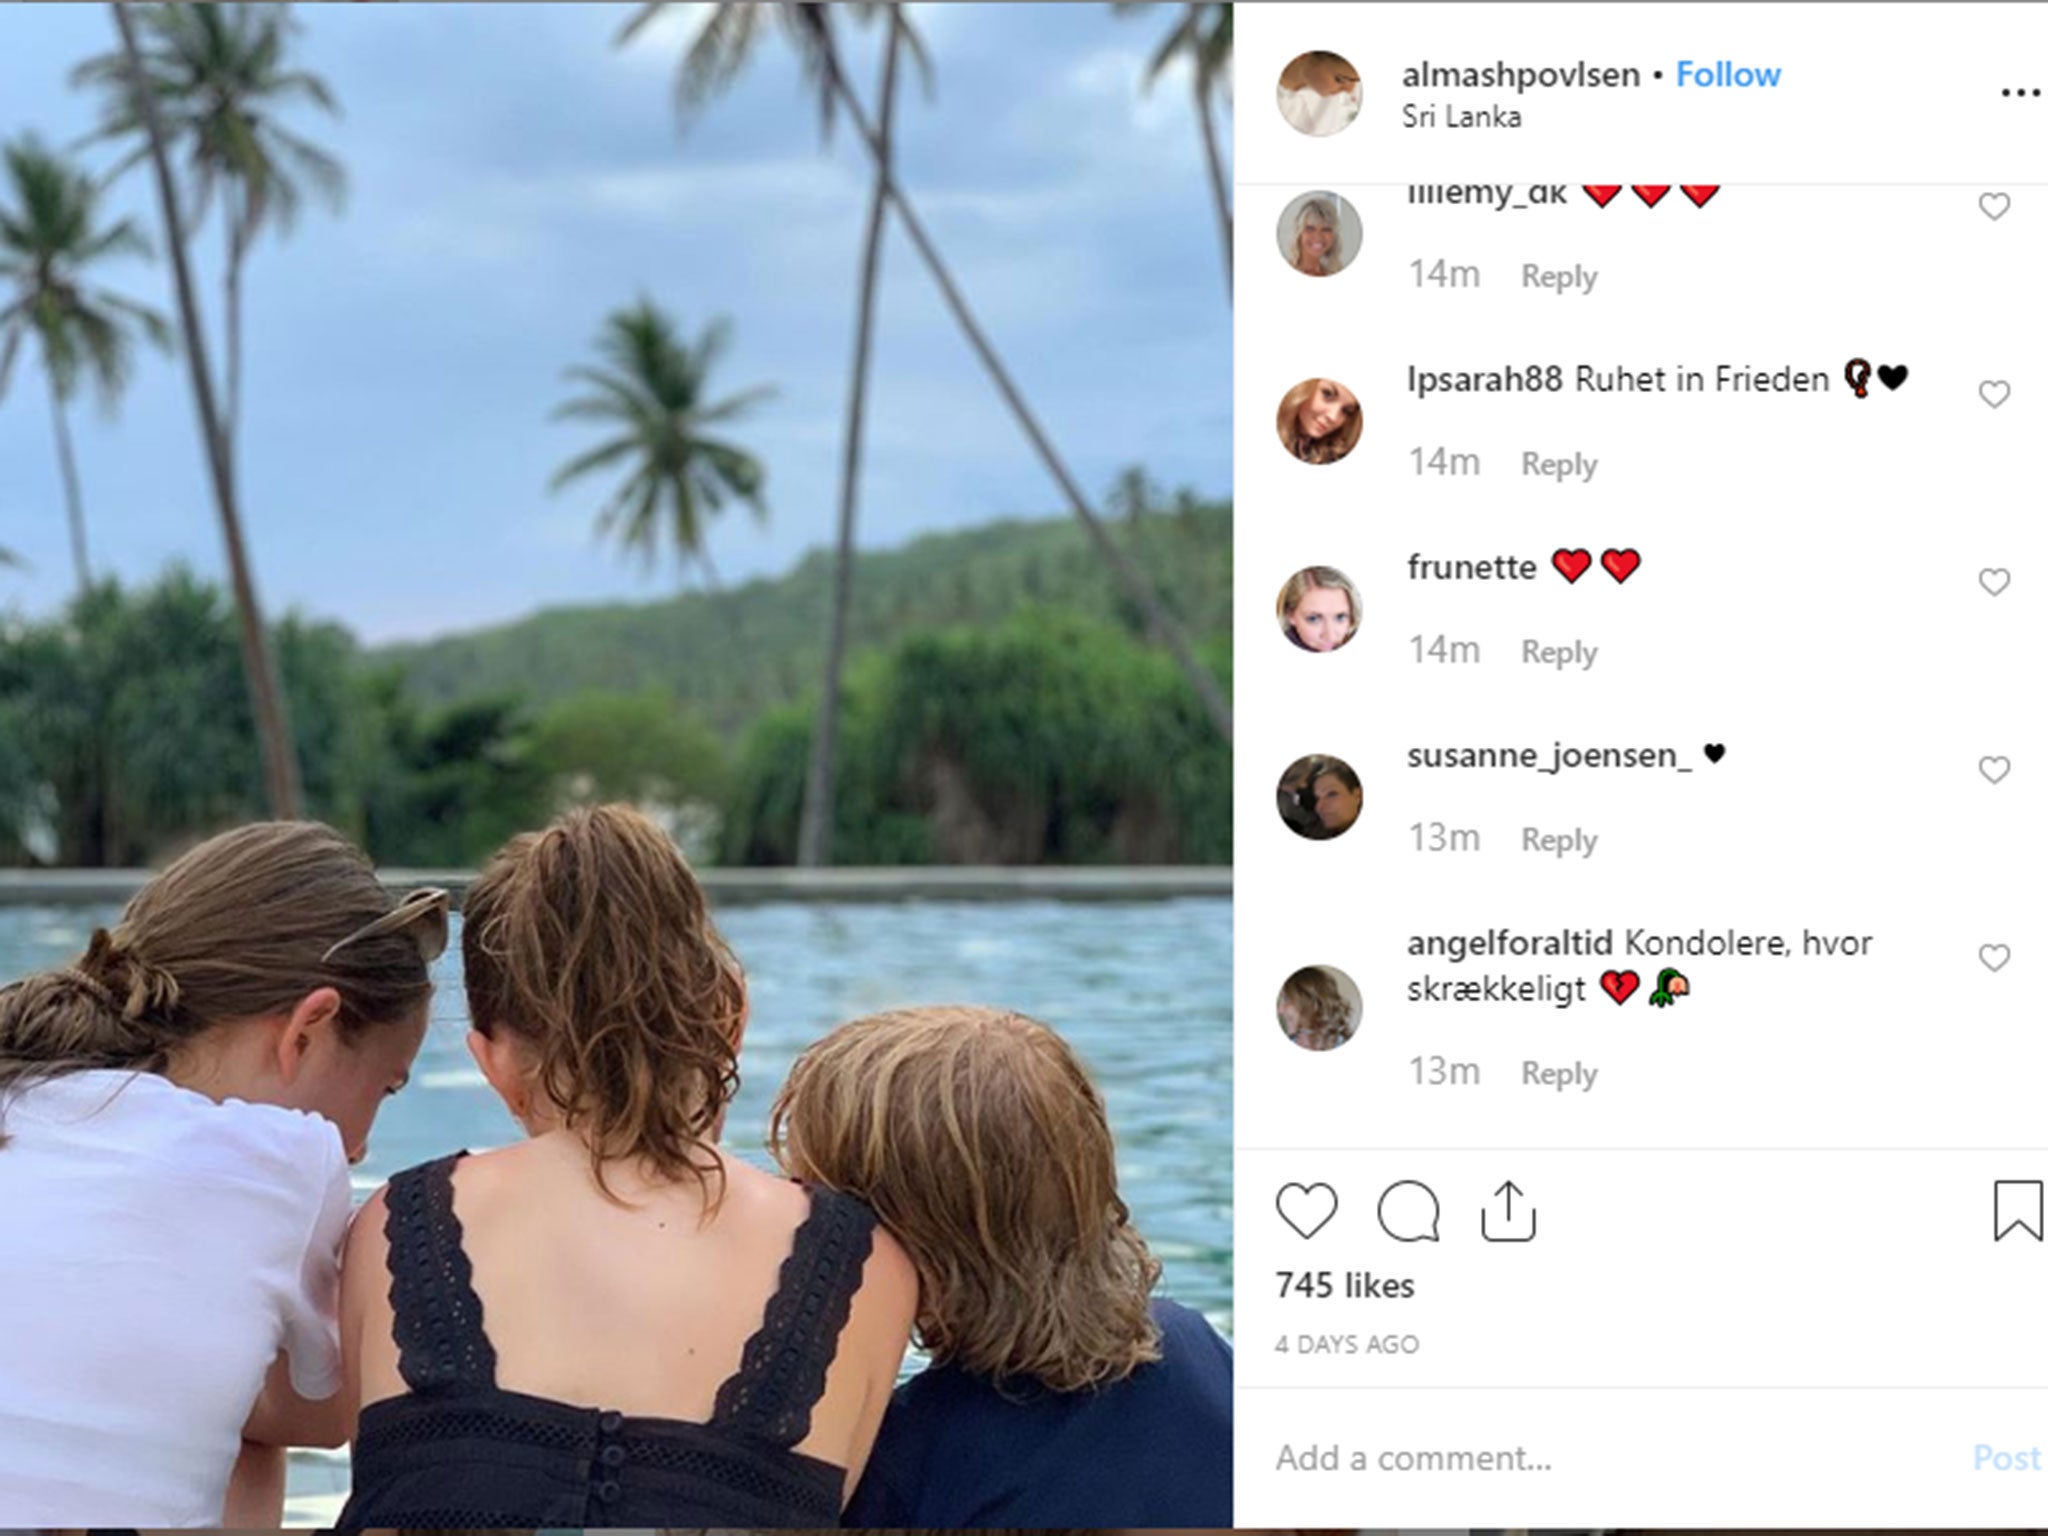 Alma Holch Povlsen posted an Instagram photo of her three siblings on holiday, days before the Sri Lanka attacks